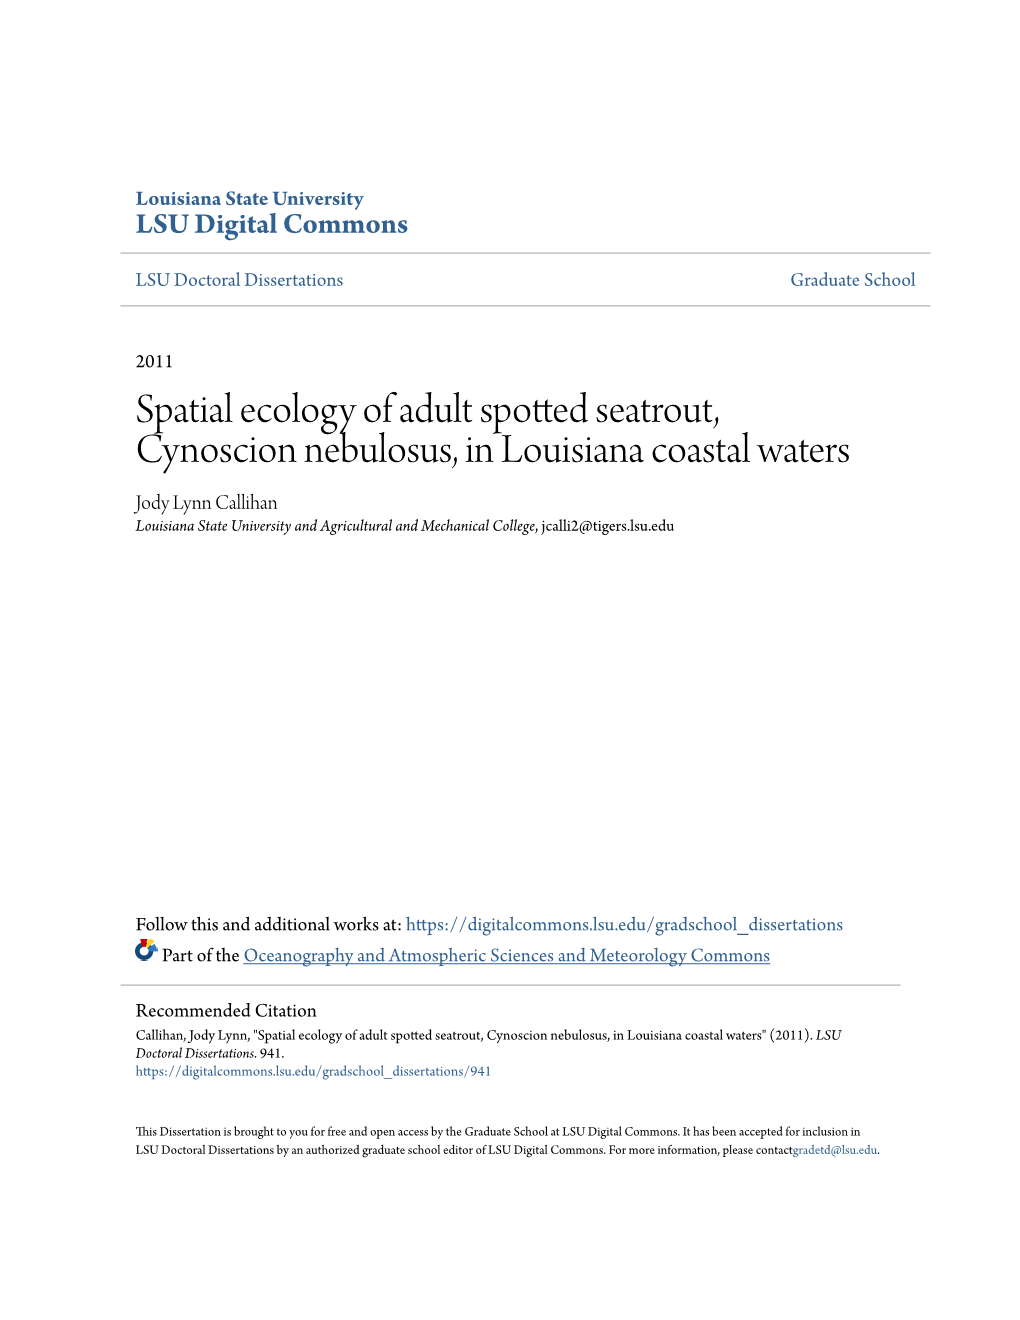 Spatial Ecology of Adult Spotted Seatrout, Cynoscion Nebulosus, In